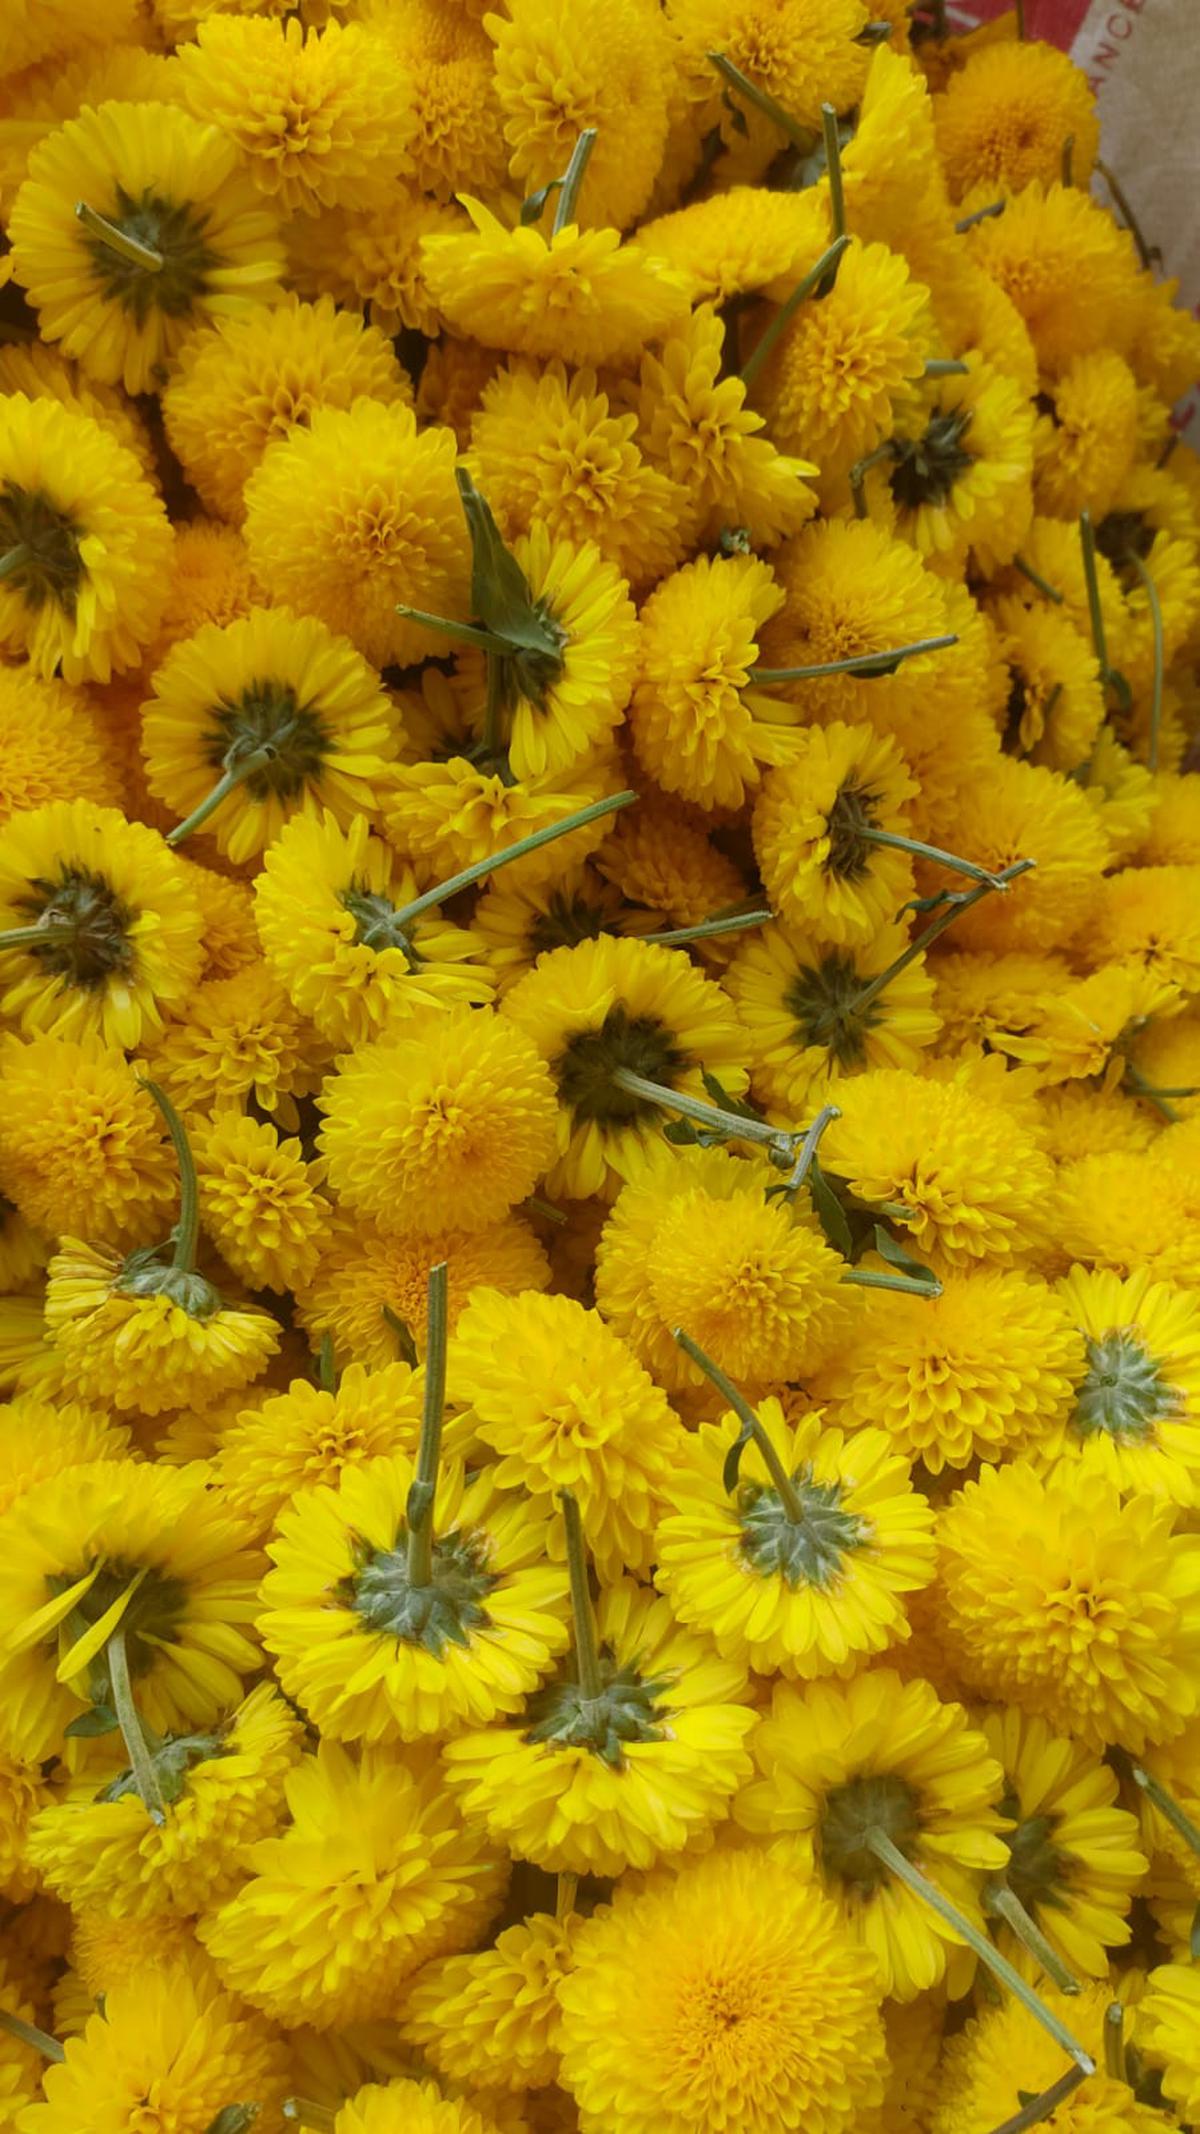 Vanguard Exports sends traditional flowers like yellow and white chrysanthemums